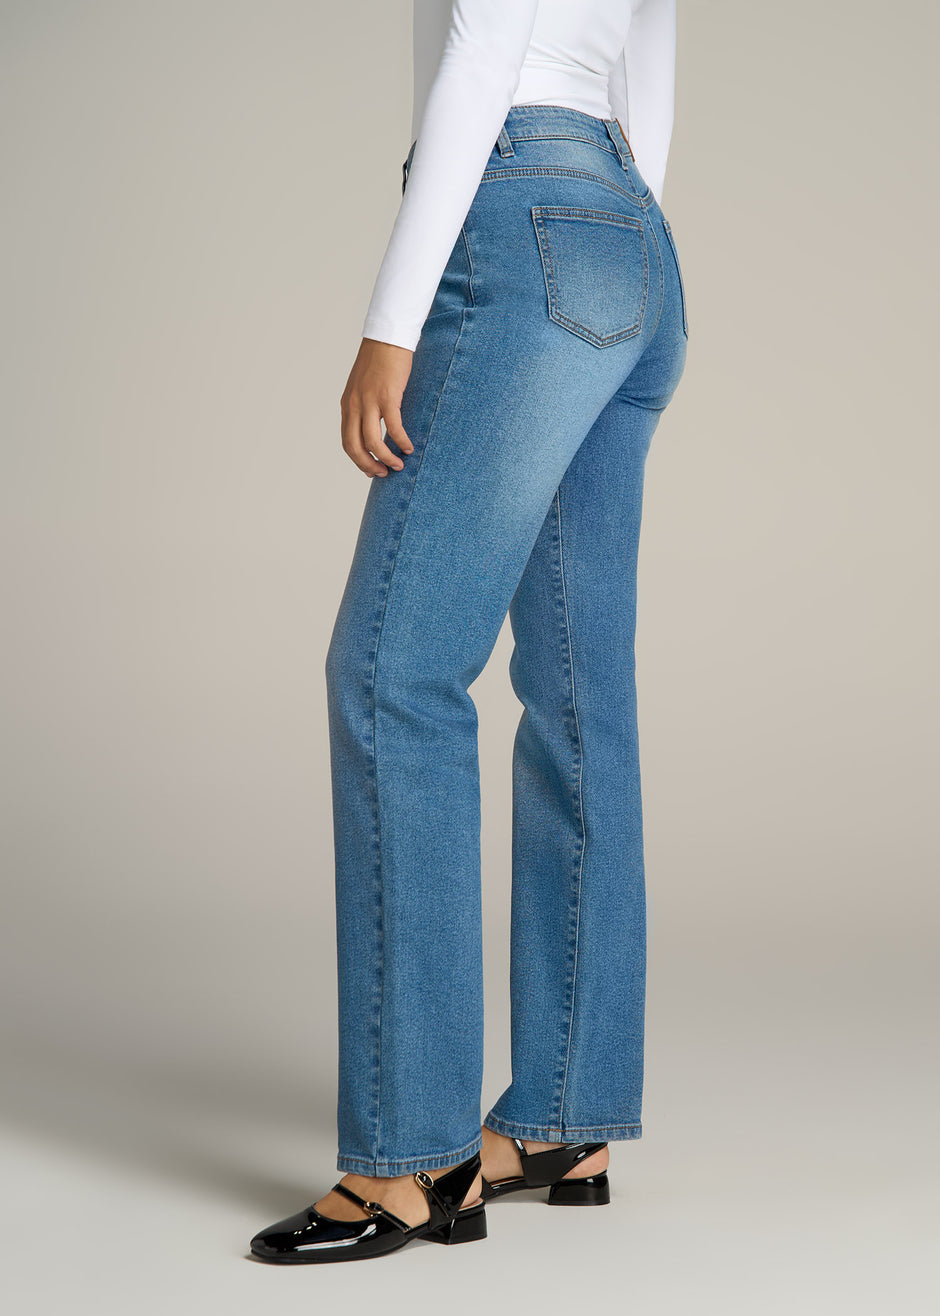 Tall Women's Clothing: Pants, Jeans & More | American Tall